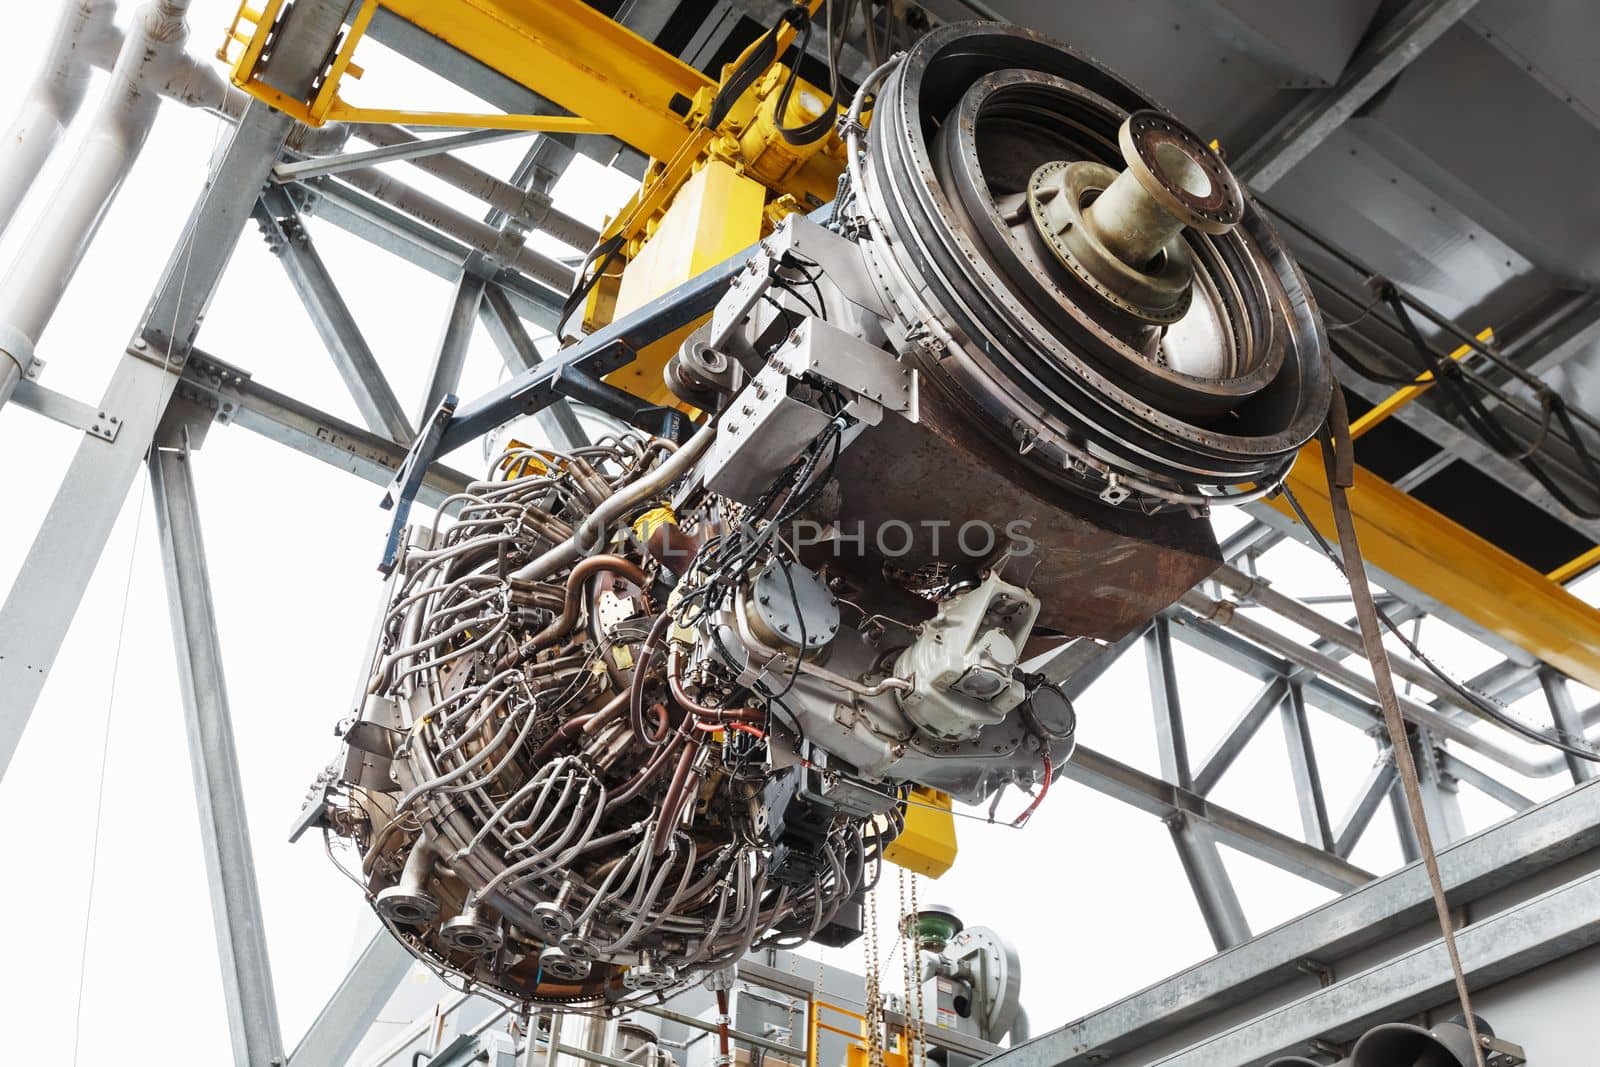 Perform a lift to install a new turbine engine for a power plant by AlexGrec